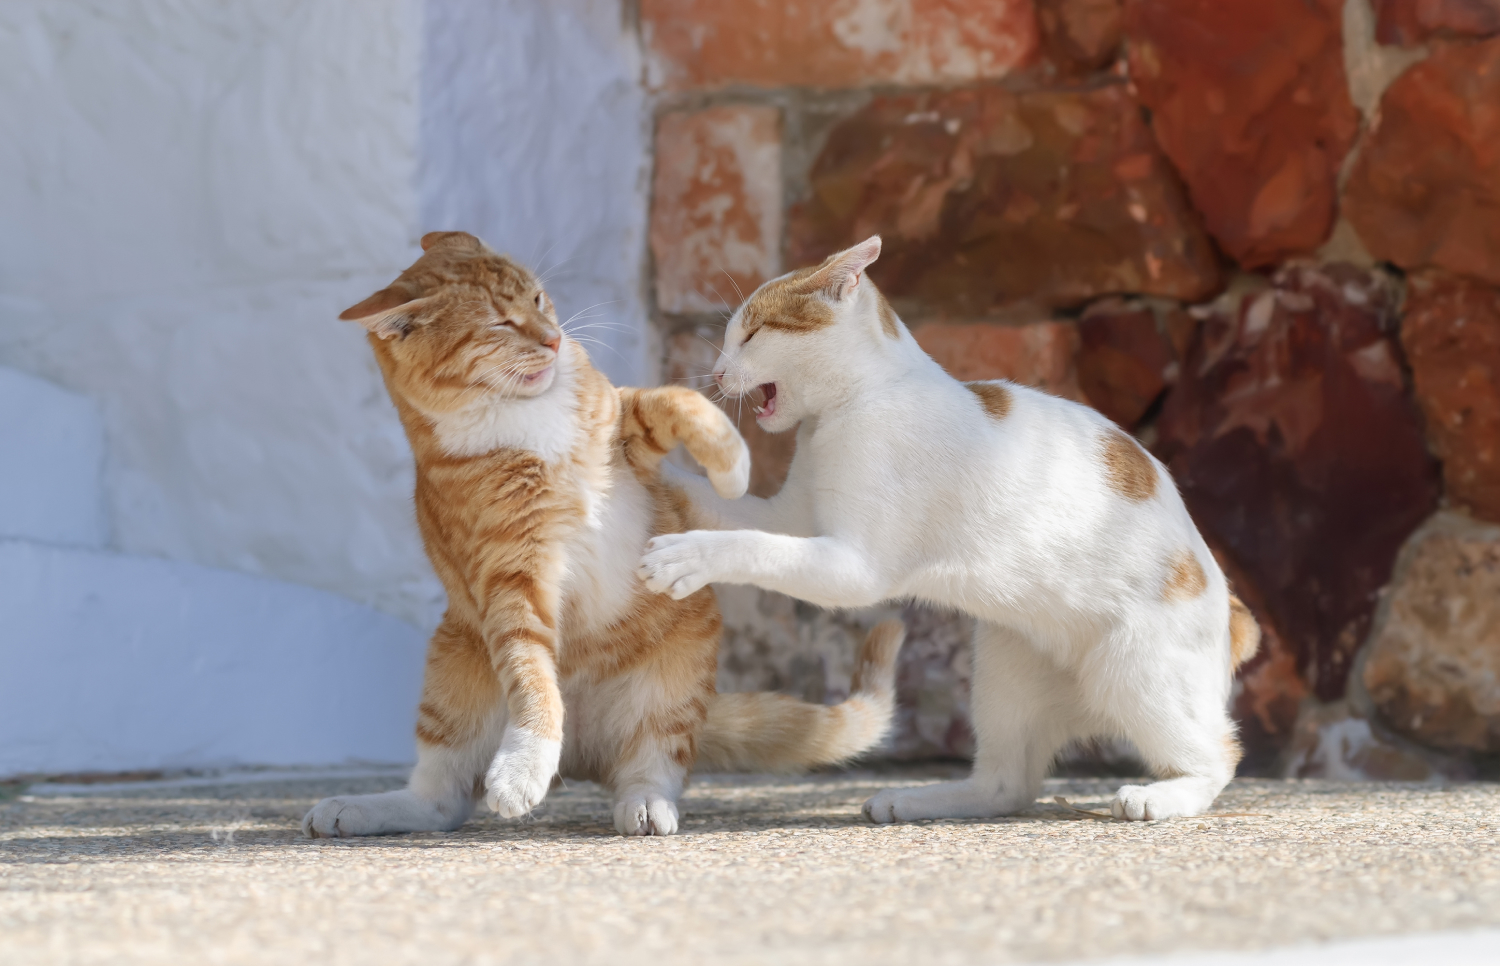 How To Tell if Cats Are Playing or Fighting: 7 Signs